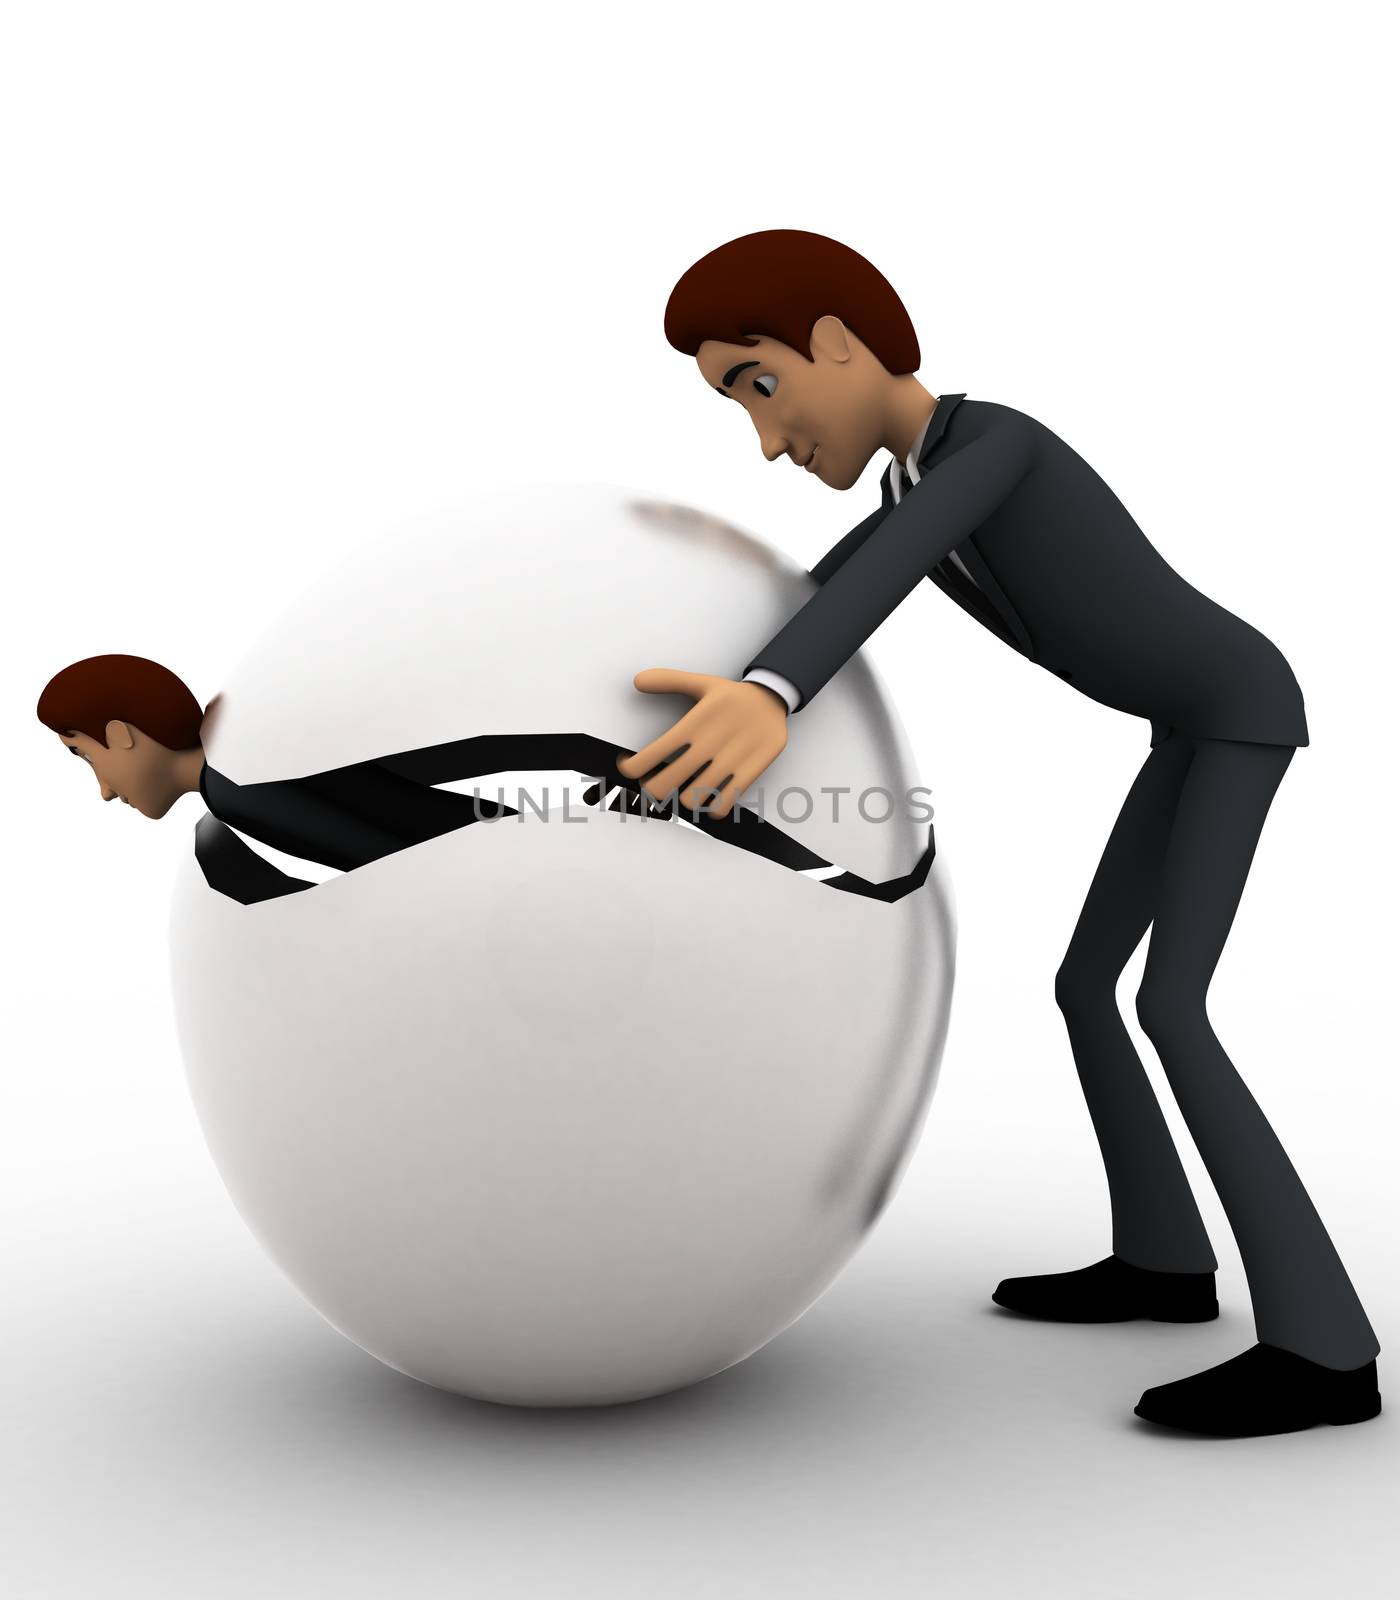 3d man try to hide body inside sphere concept on white background, side angle view